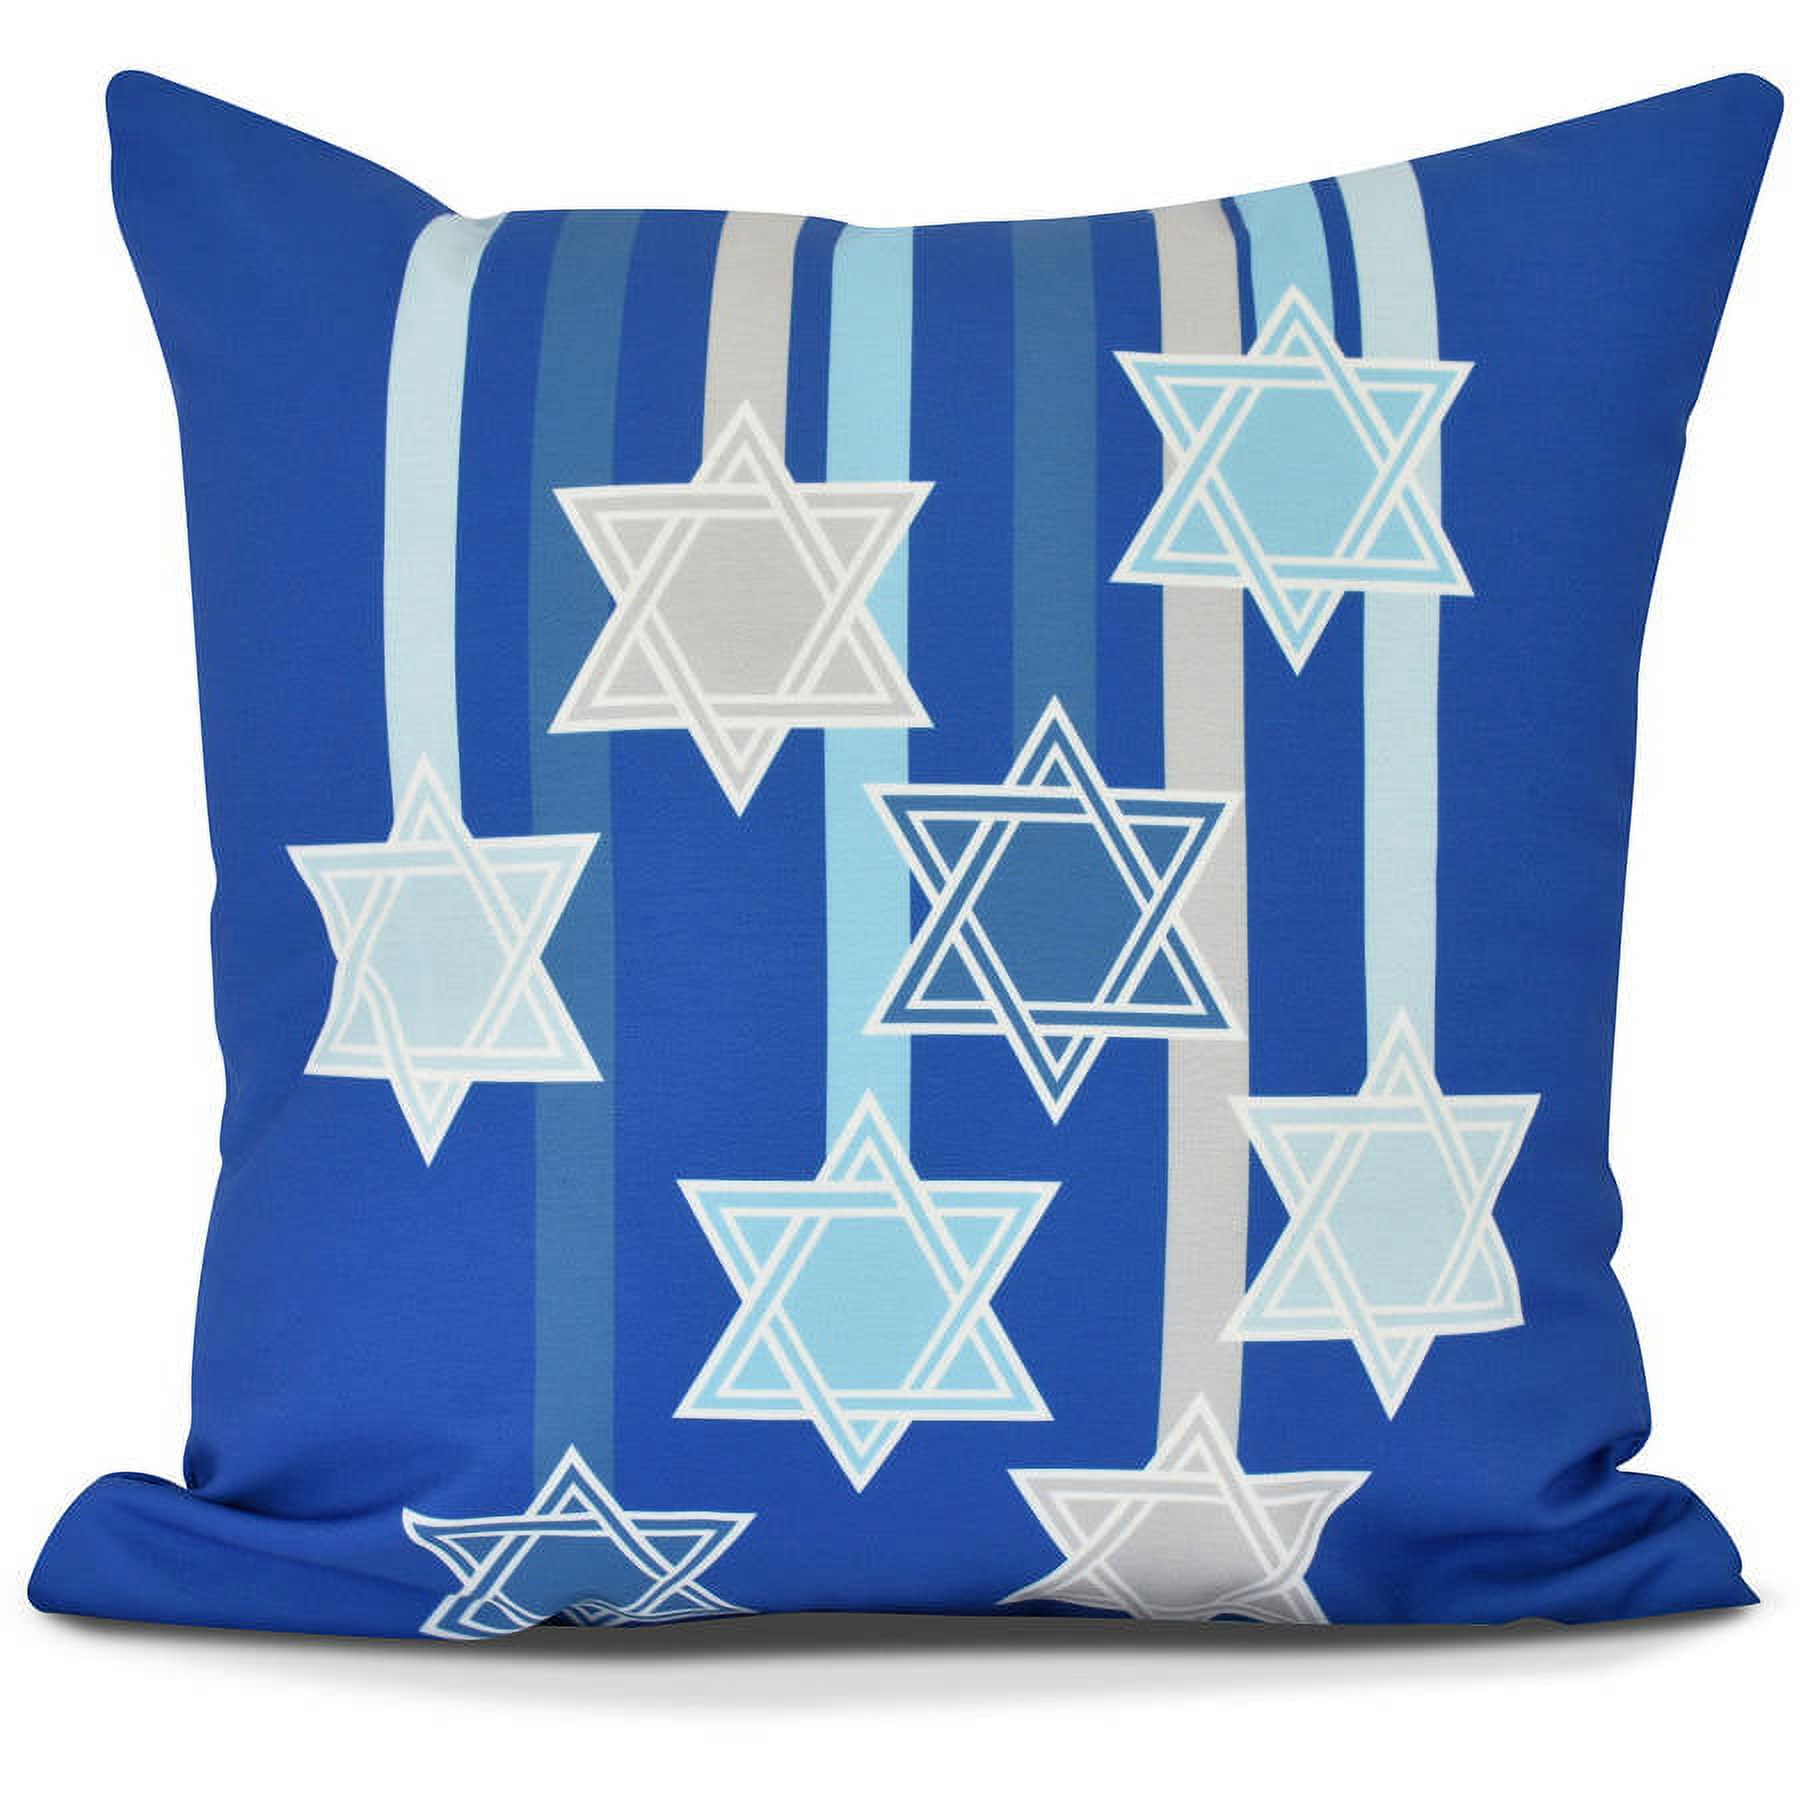 Simply Daisy, Shooting Stars Geometric Print Outdoor Pillow - image 1 of 2